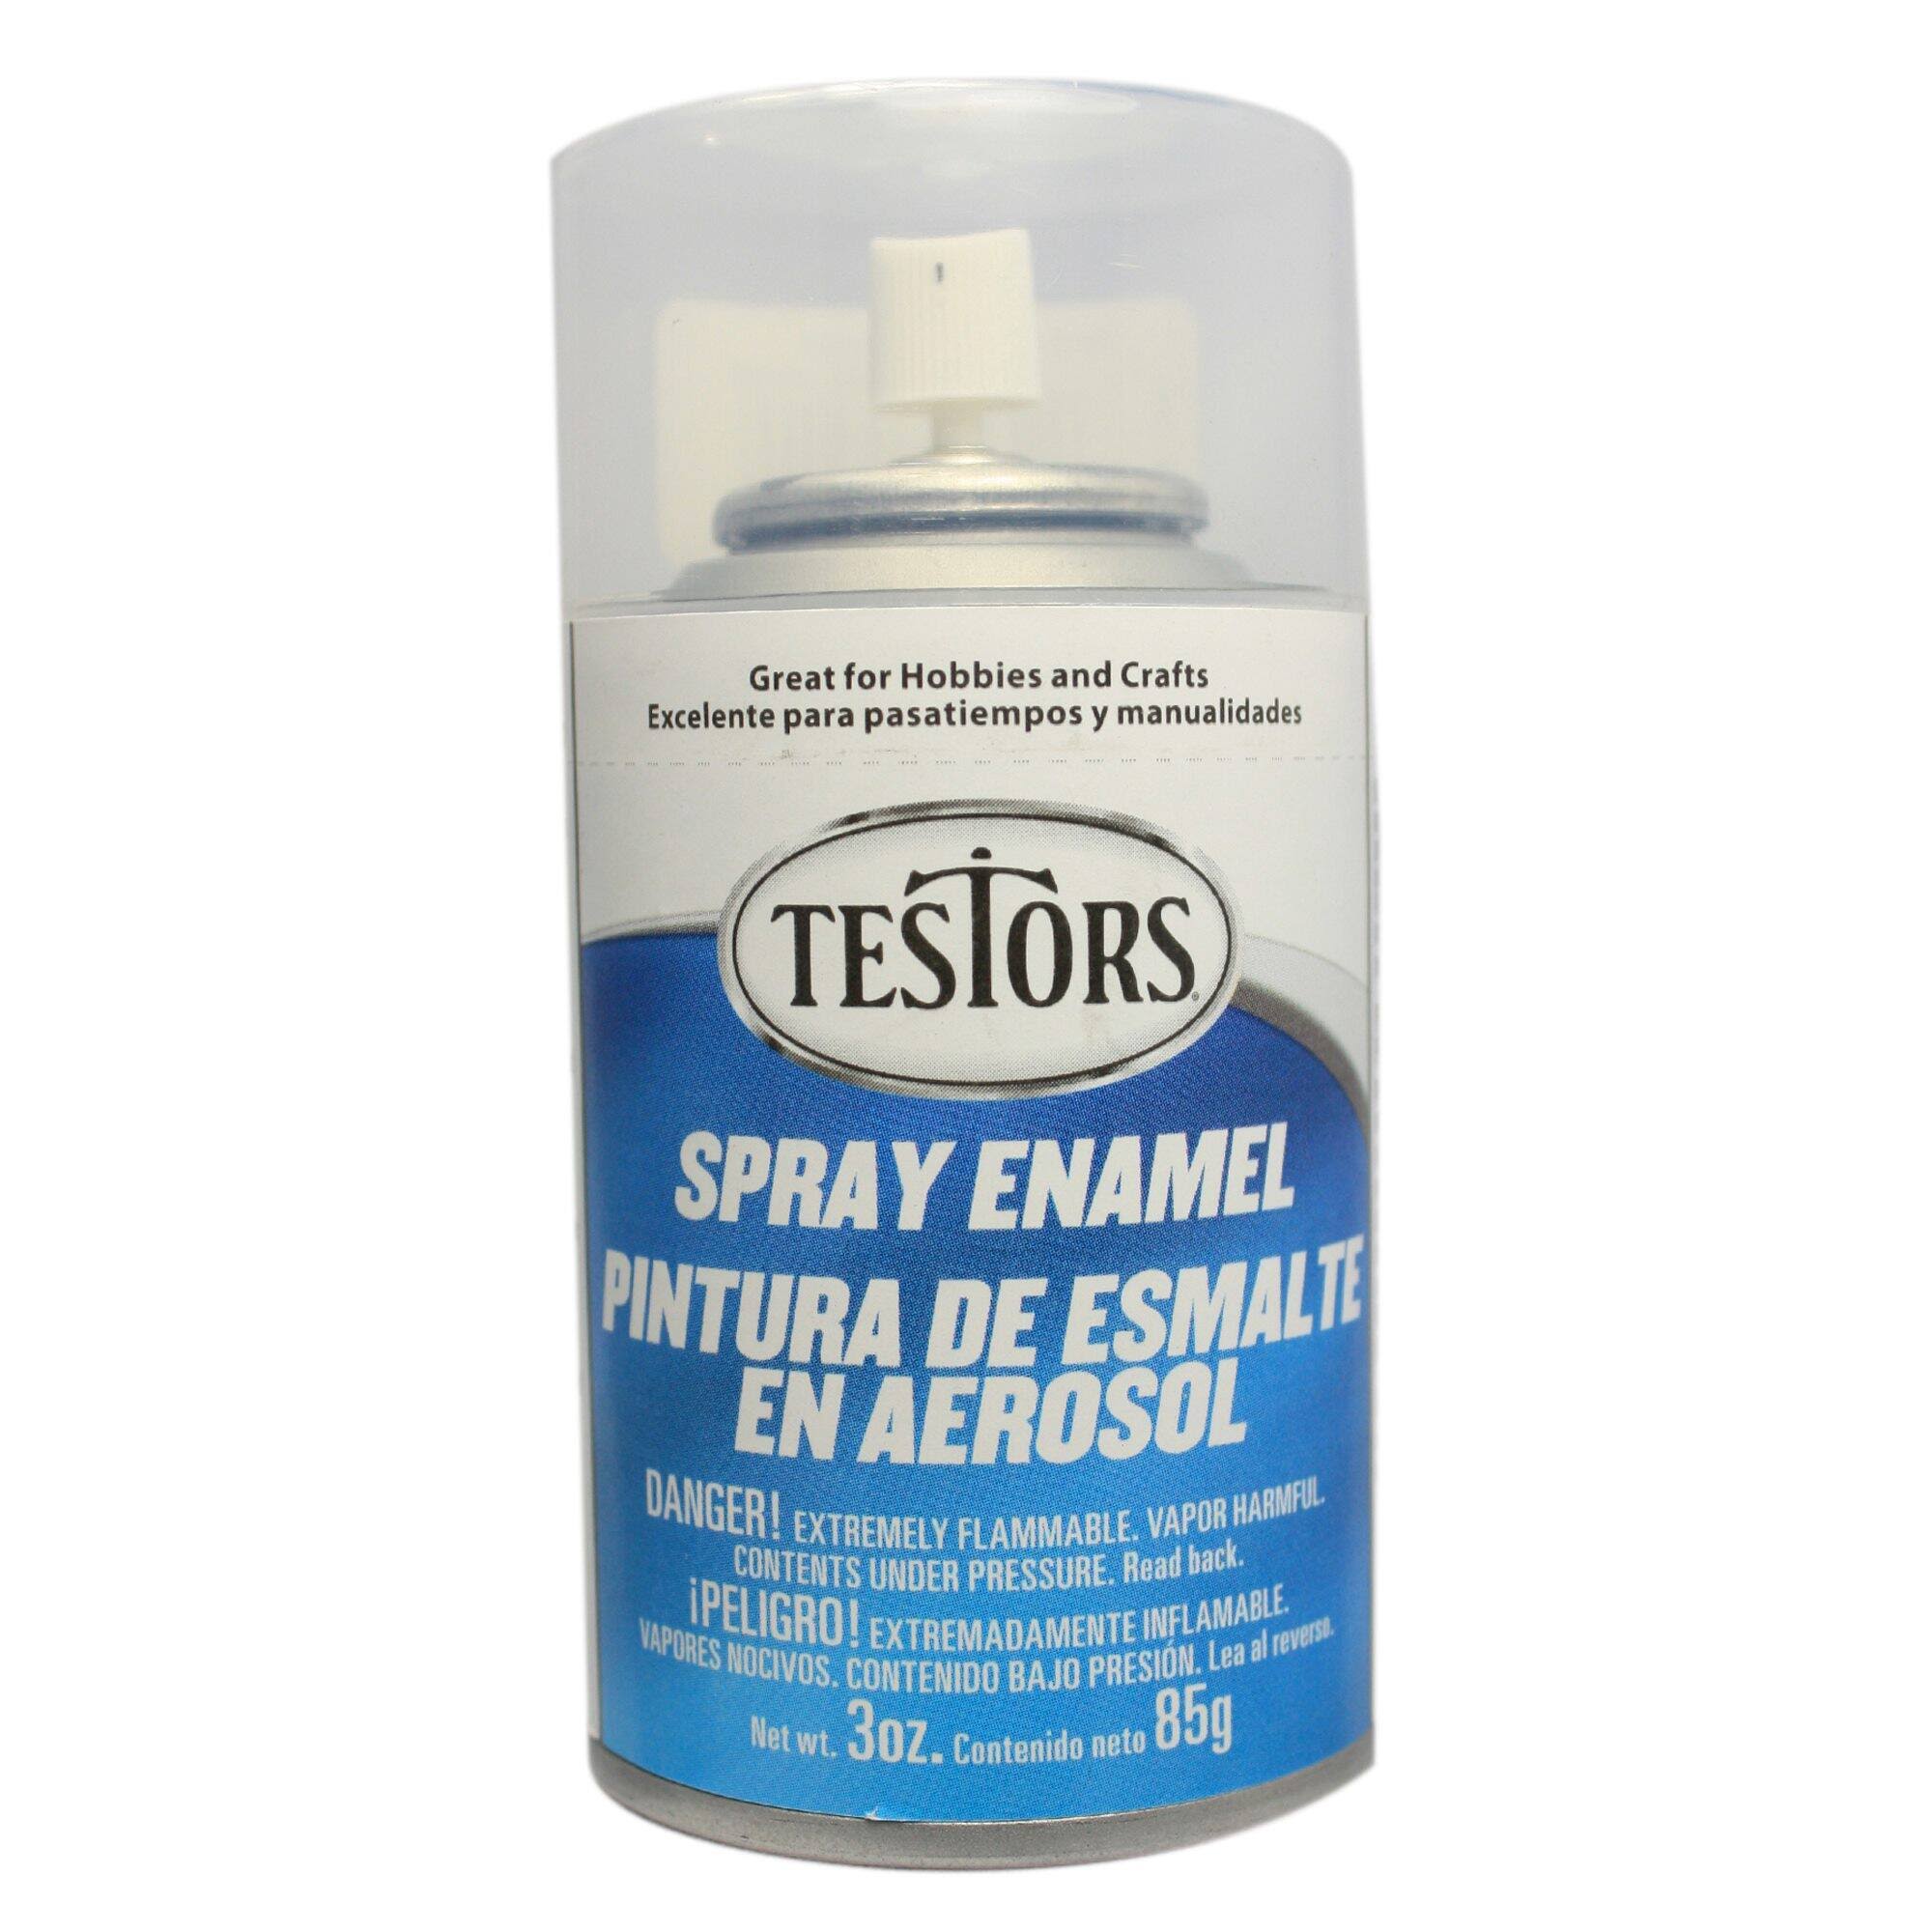 Testors Spray High Gloss Clear 90ml Tes1814t | Testors | Hobbies | Delivery Guaranteed | Free Shipping On All Orders | 30 Day Money Back Guarantee